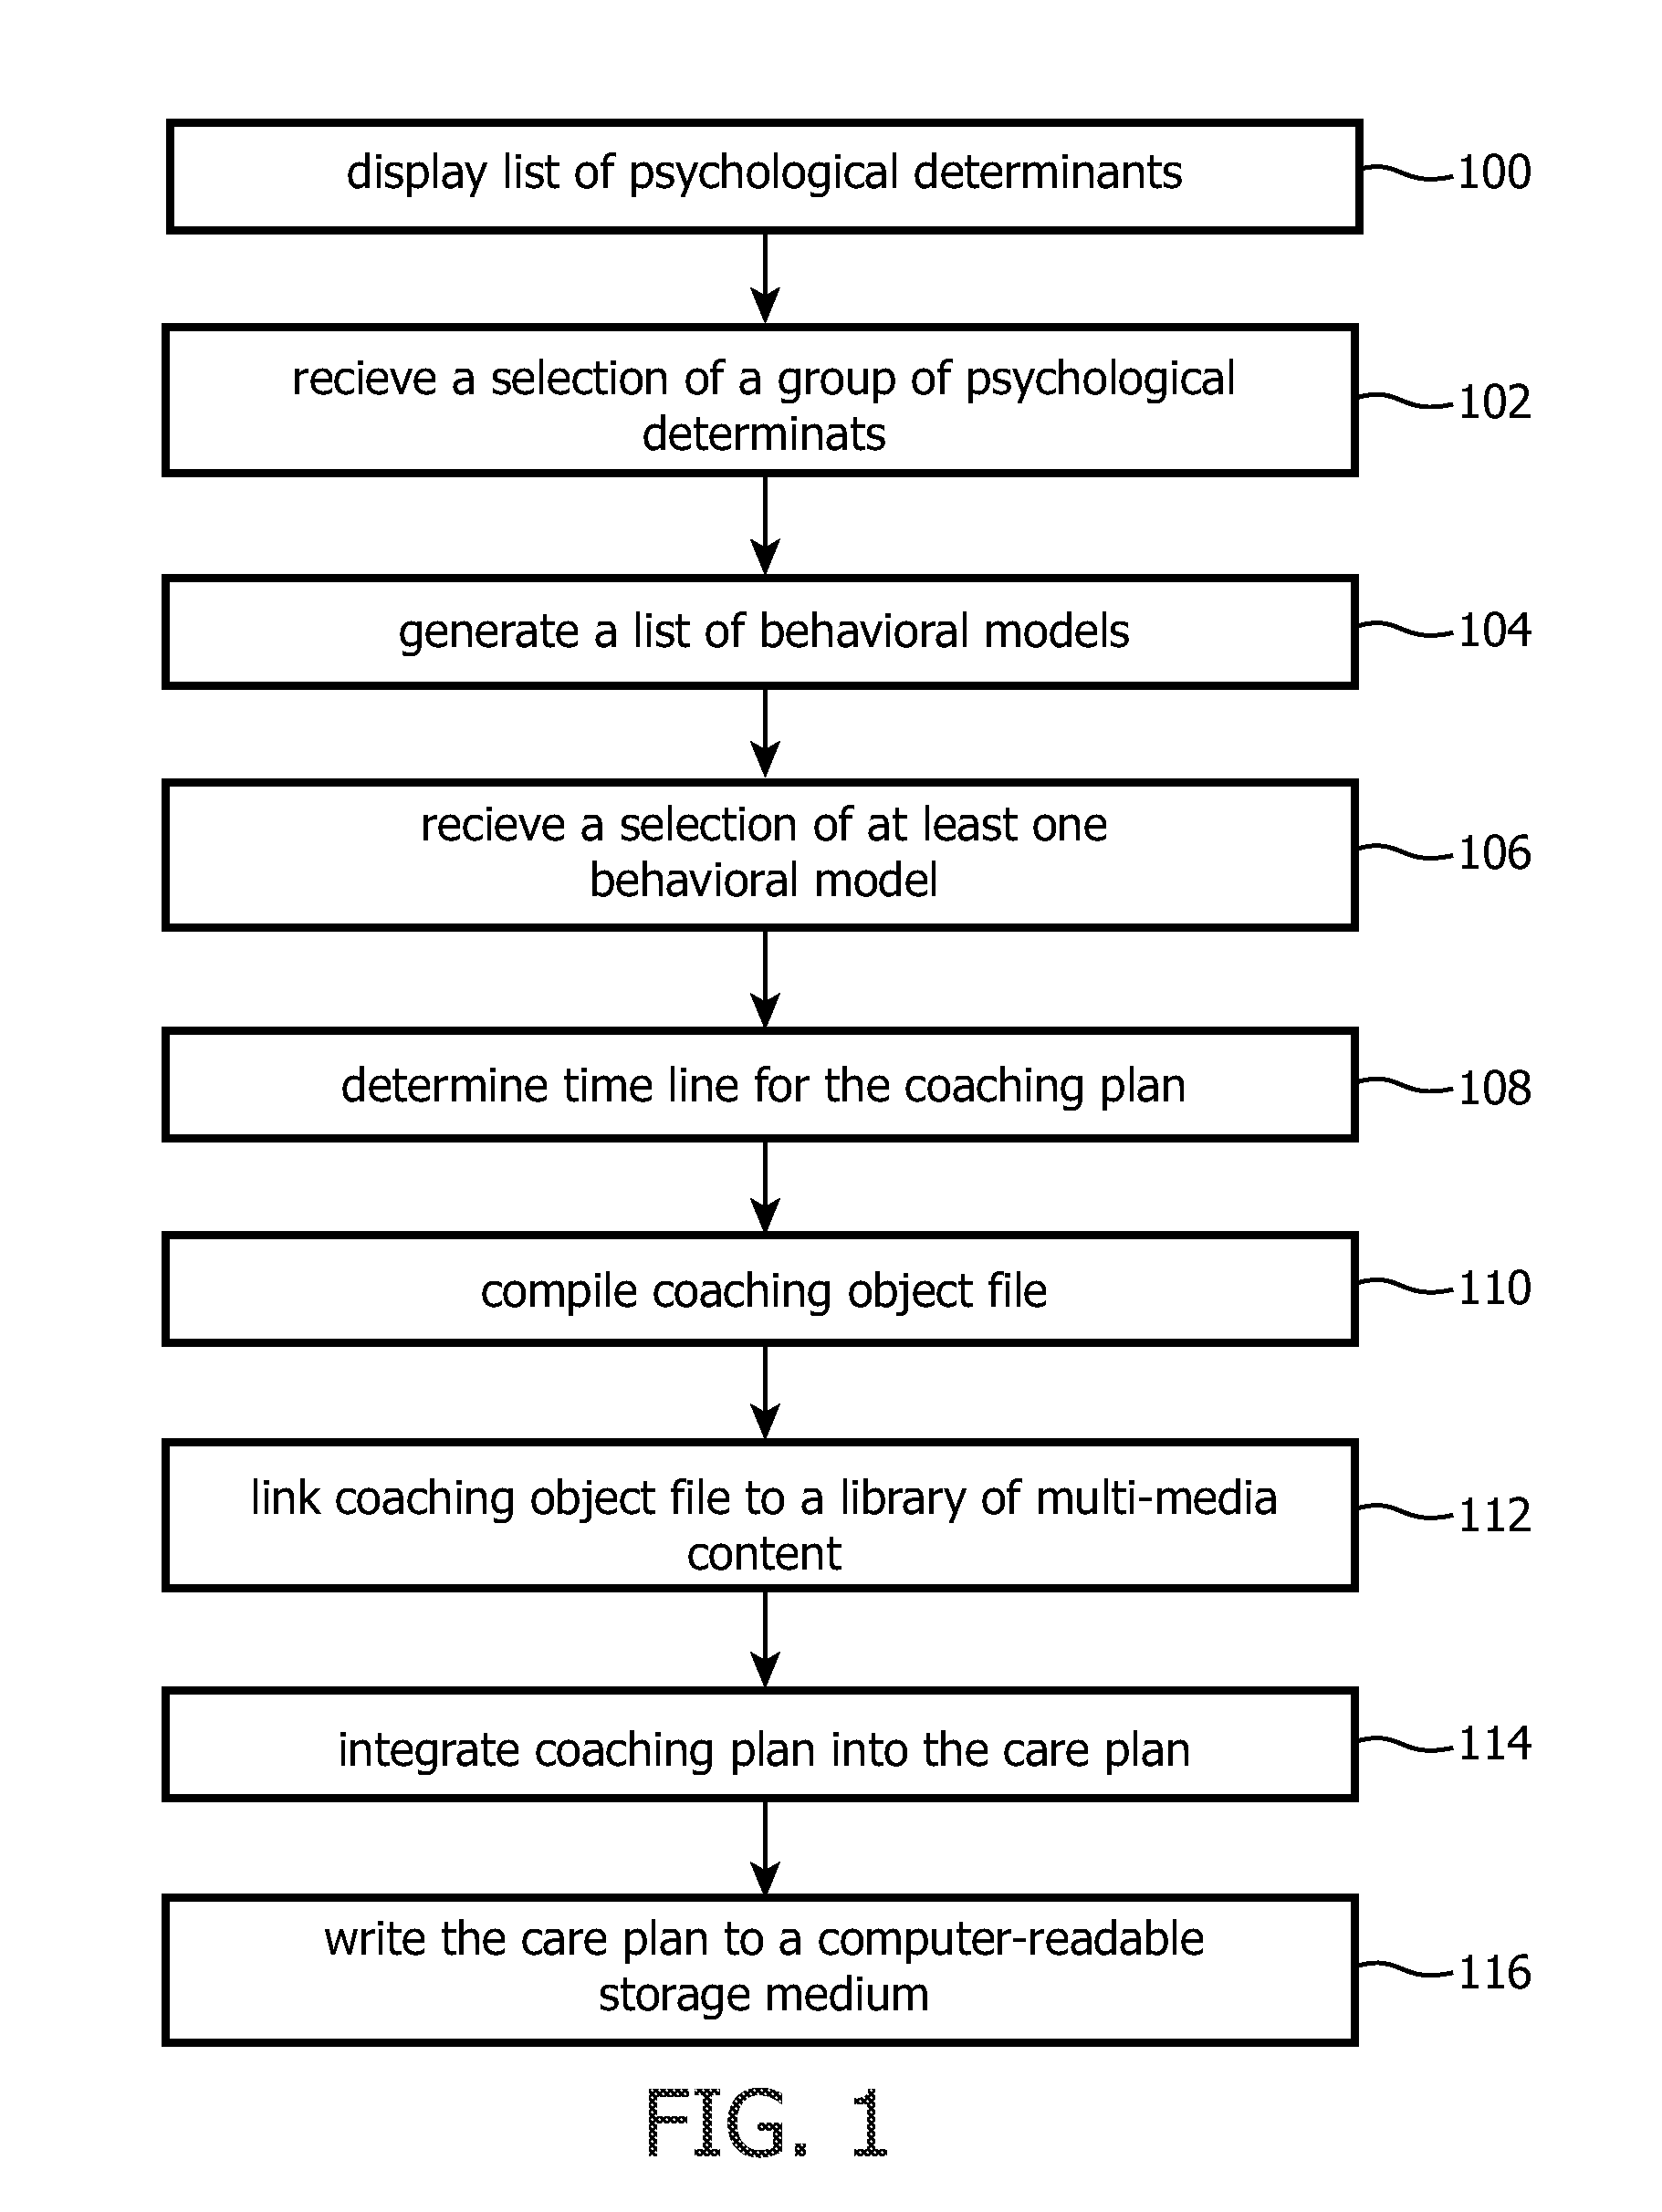 Computer-implemented method of manufacturing a computer-readable storage medium for a remote patient management system